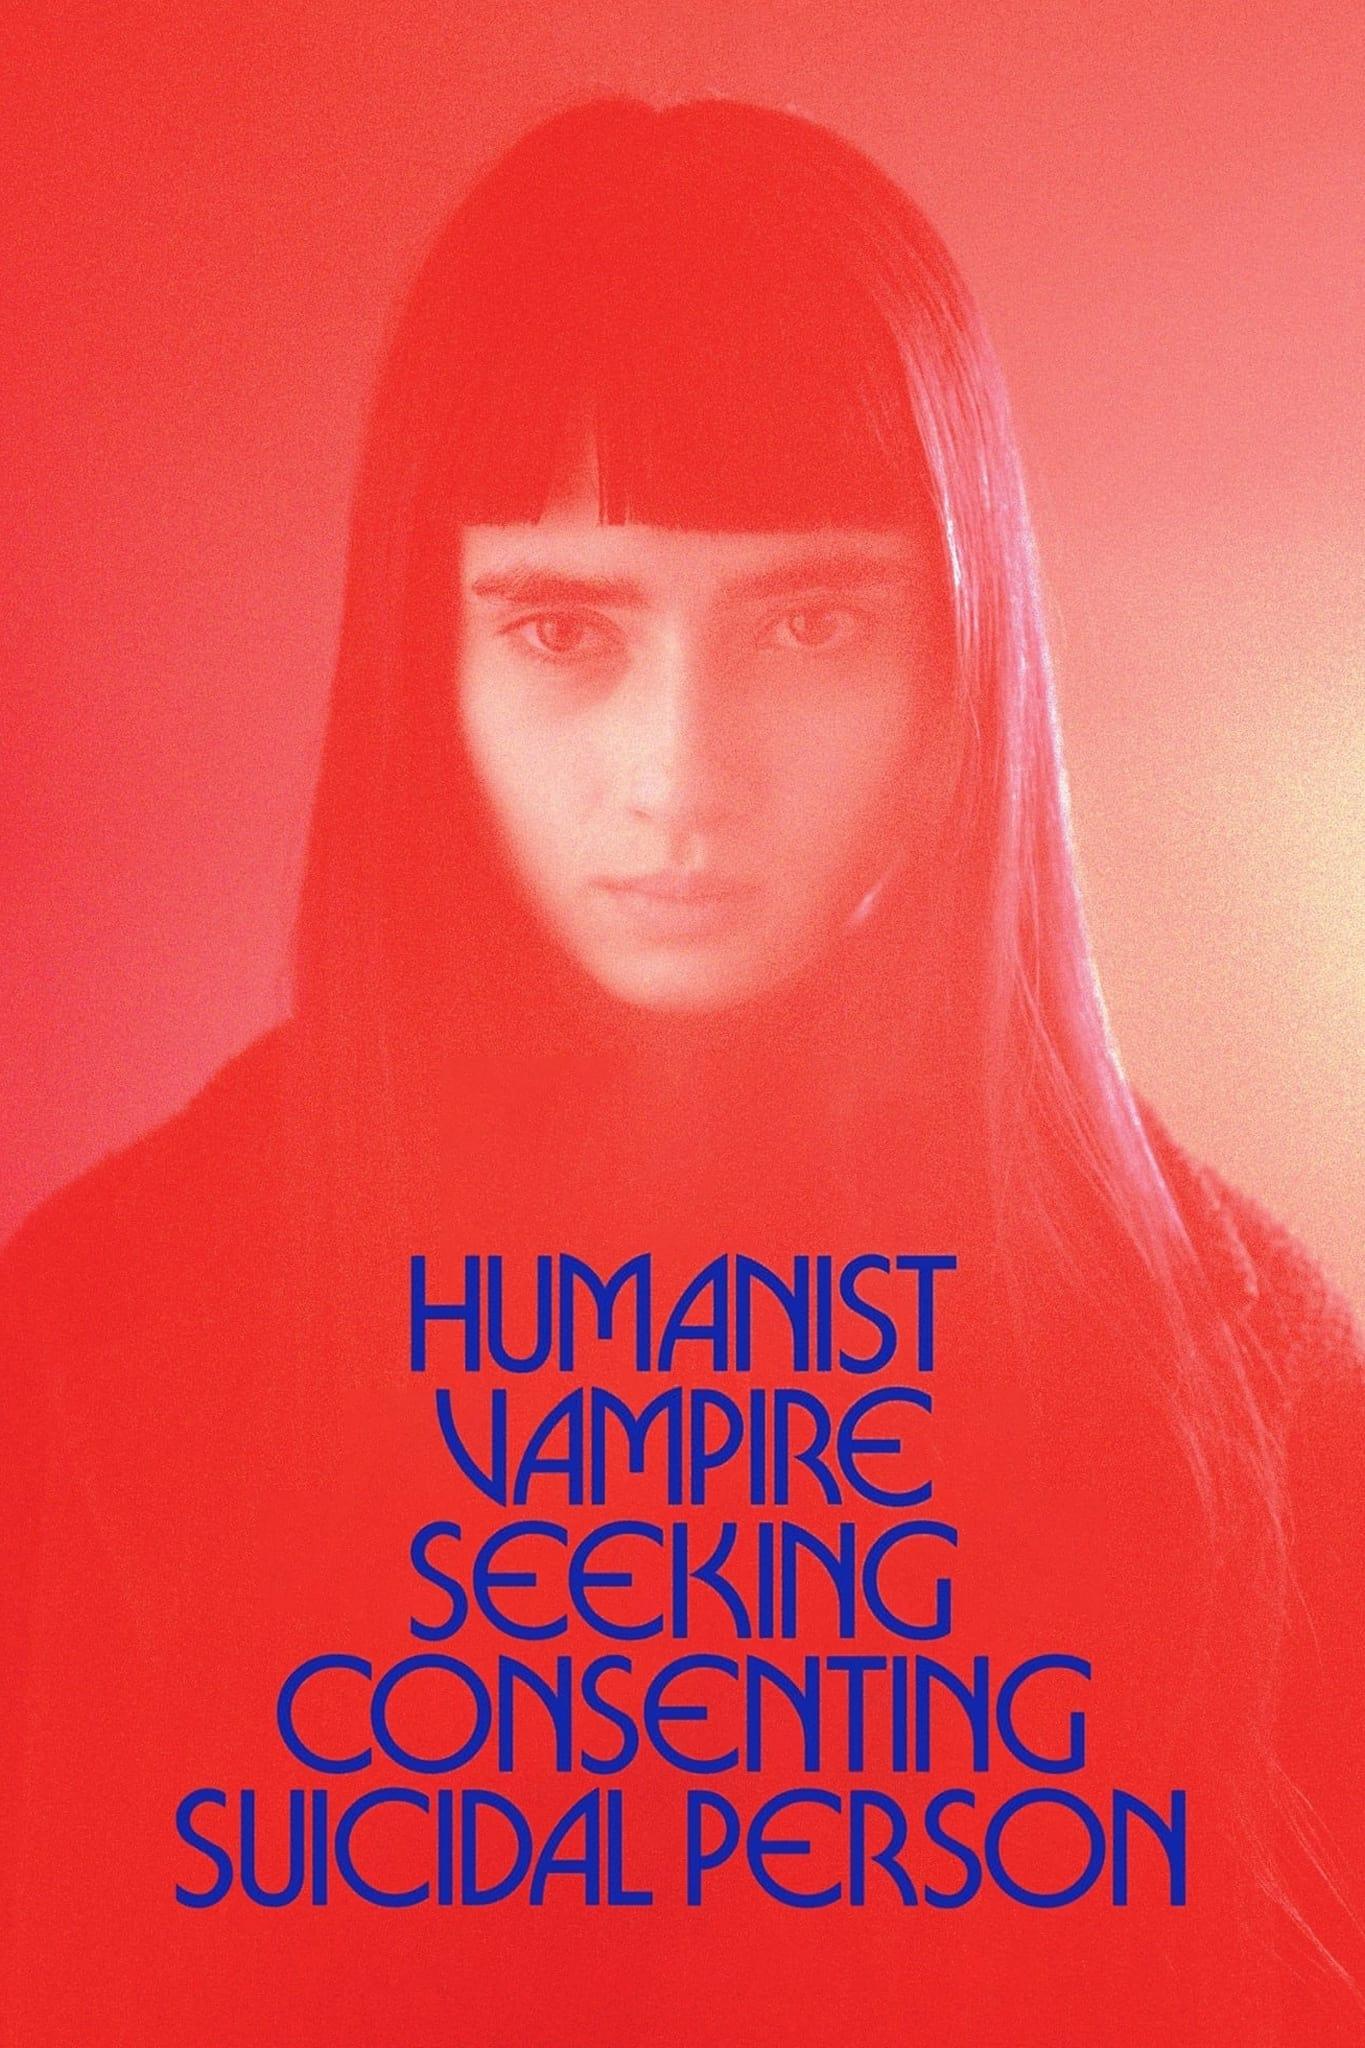 Humanist Vampire Seeking Consenting Suicidal Person poster